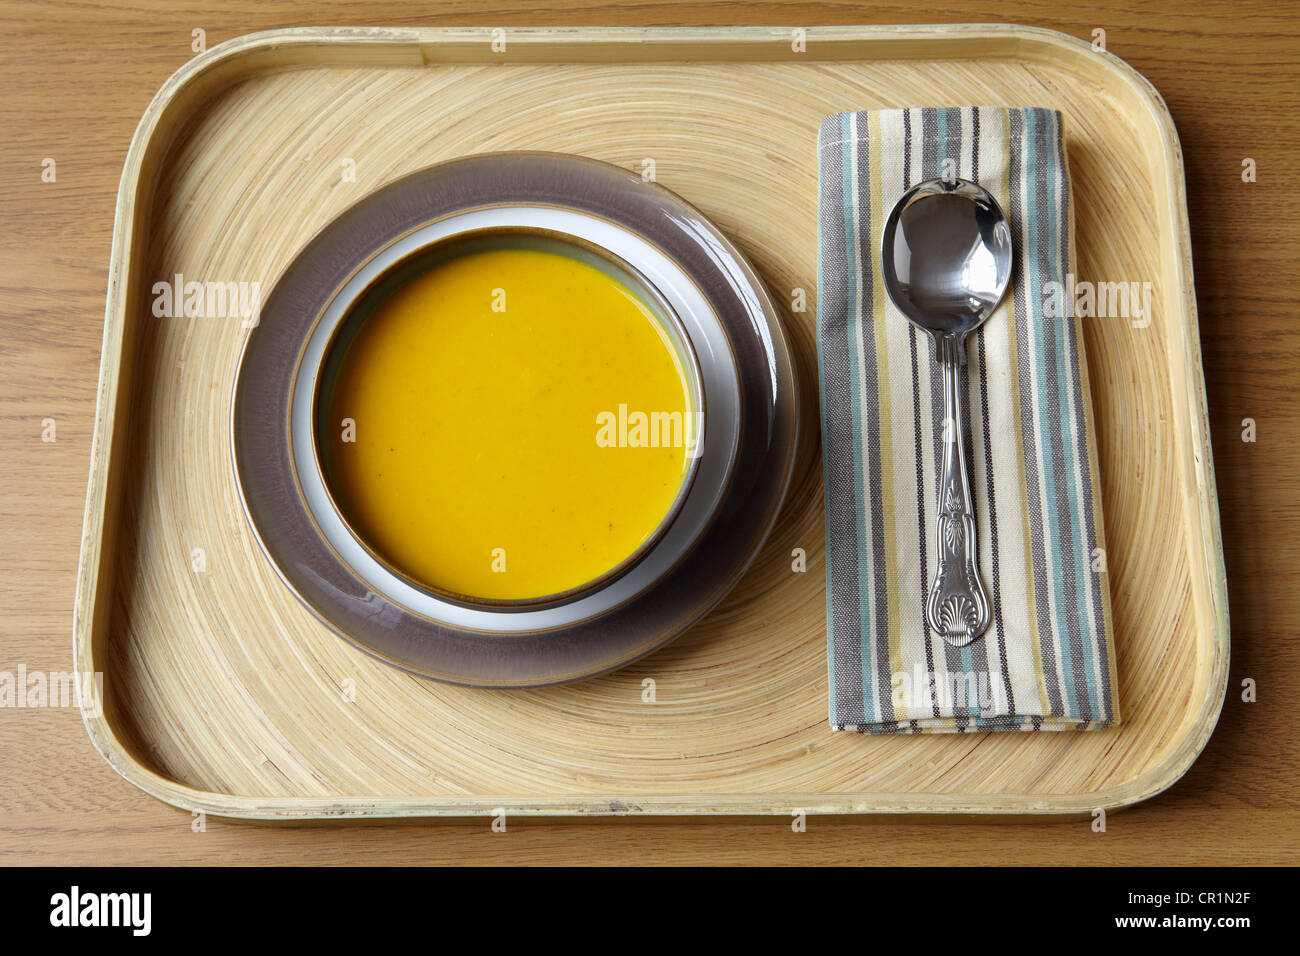 Tray with bowl of soup and spoon Stock Photo